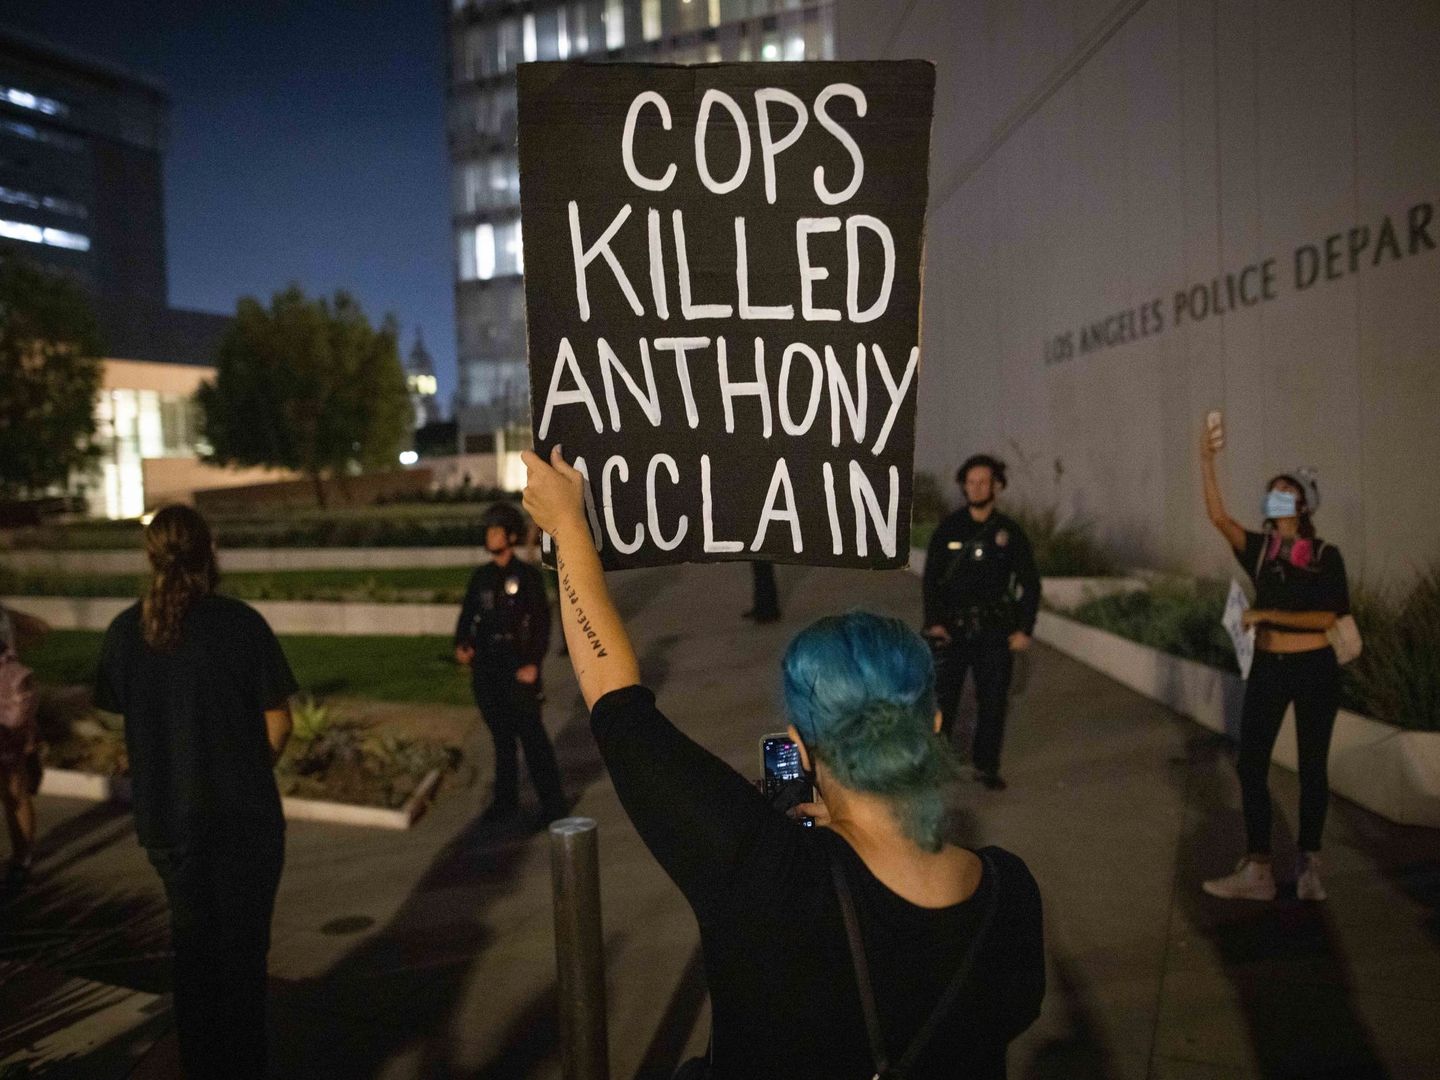 pLos Angeles (United States), 24 08 2020.- A Black Lives Matter protester holds a sign at a protest in Los Angeles, California, USA, 24 August 2020. The protest was organized in response to the police shooting of Jacob Blake in Wisconsin and Anthony McClain in Pasadena. (Protestas, Estados Unidos) EFE EPA CHRISTIAN MONTERROSA/p